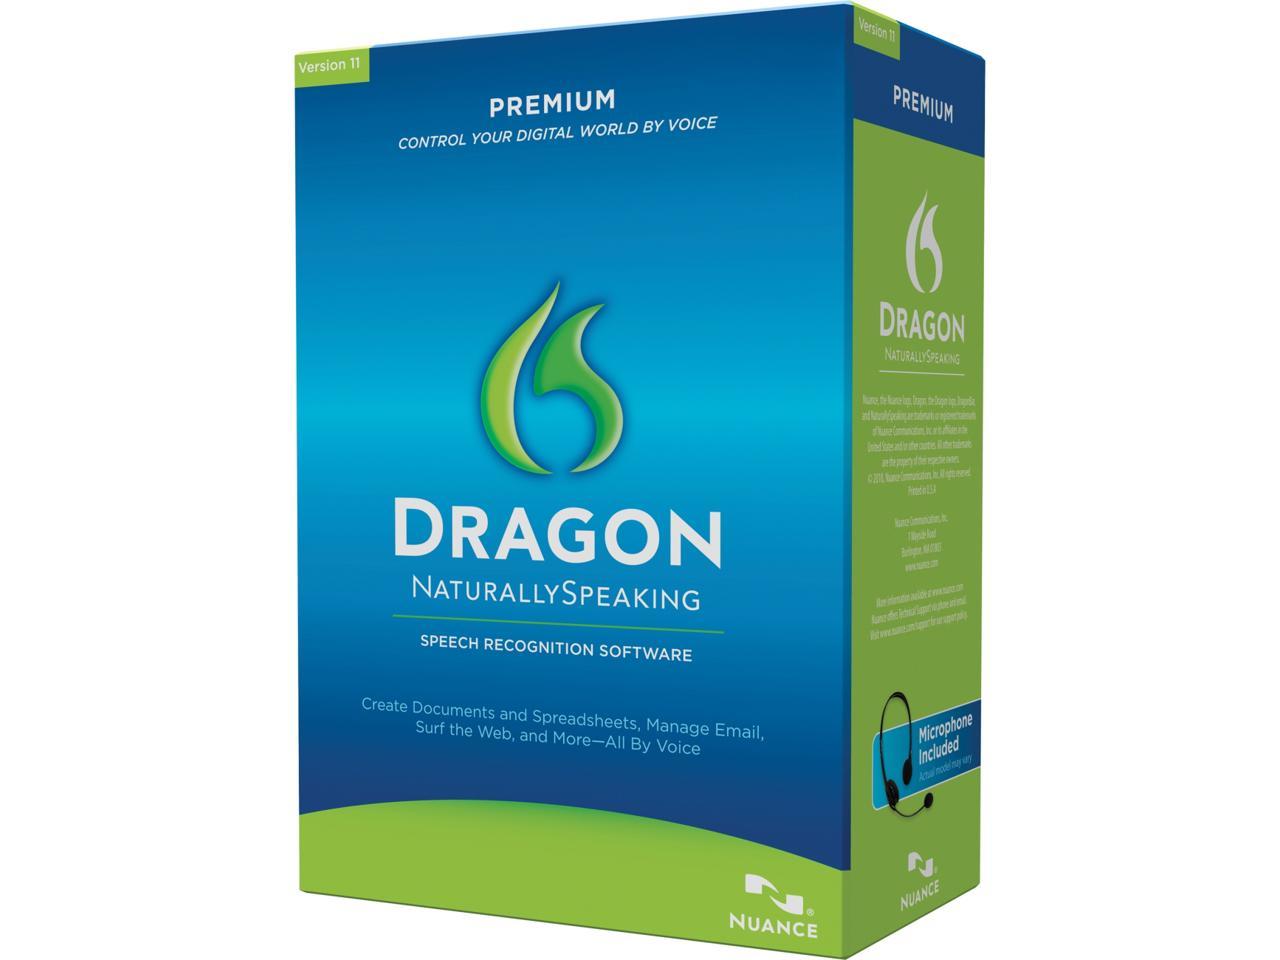 nuance dragon naturally speaking software free